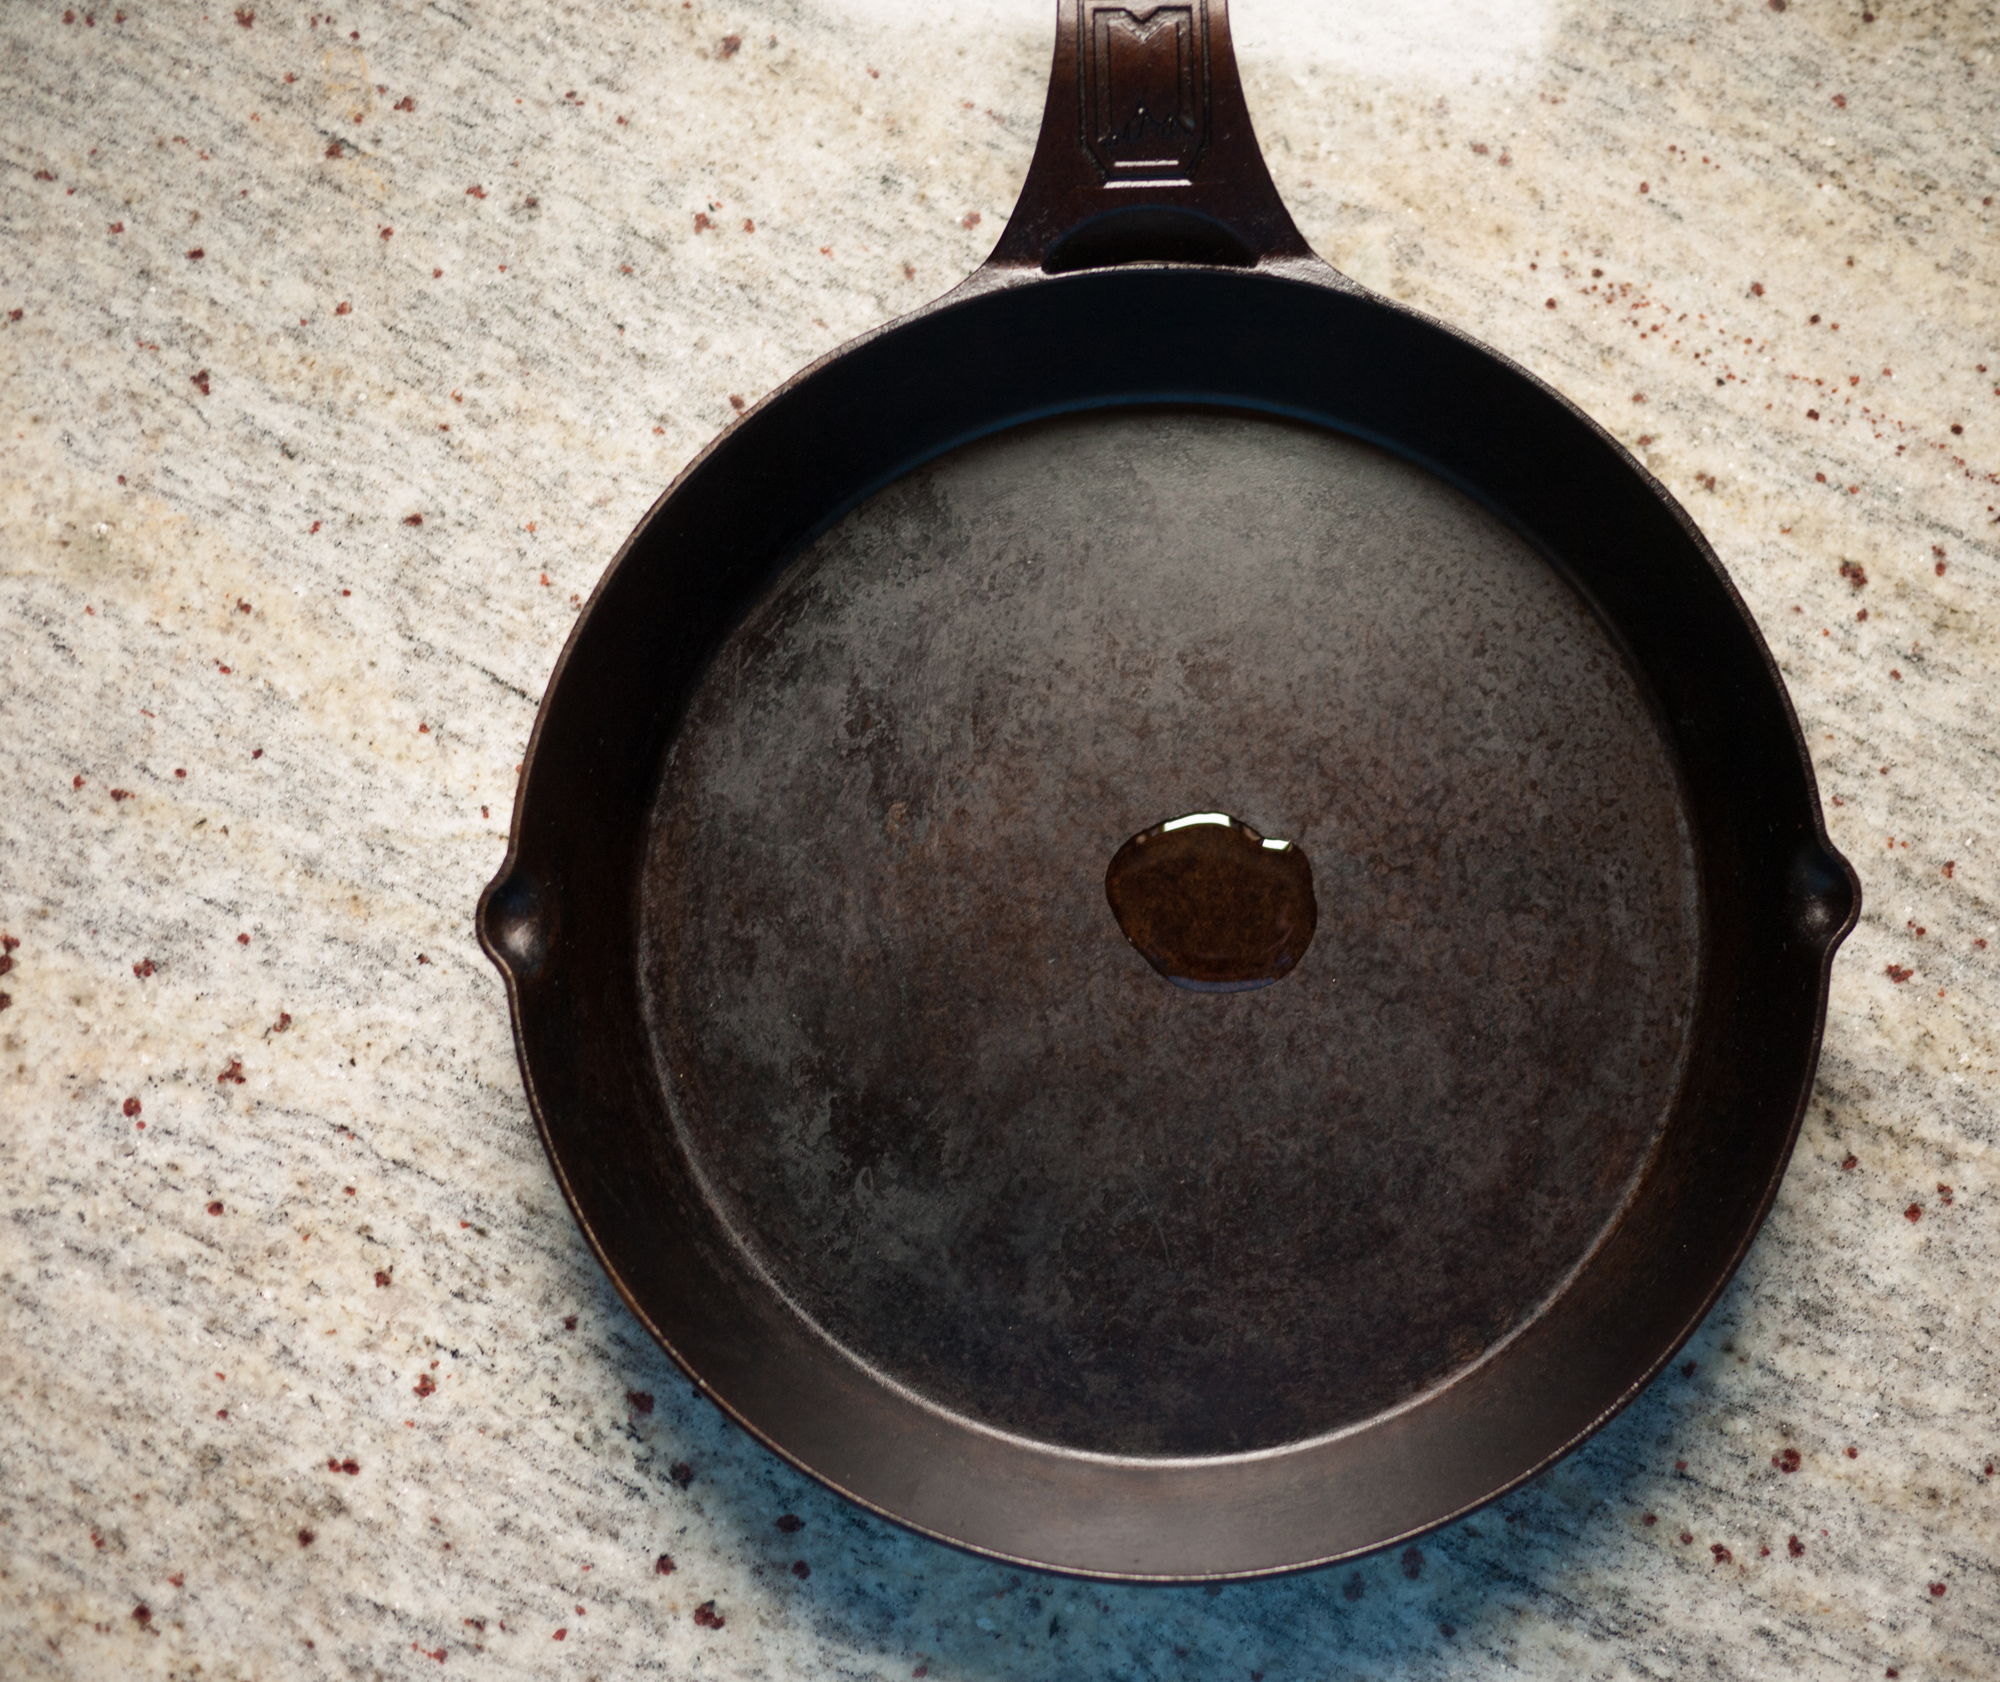 How to Buy, Season, and Maintain Cast Iron Cookware